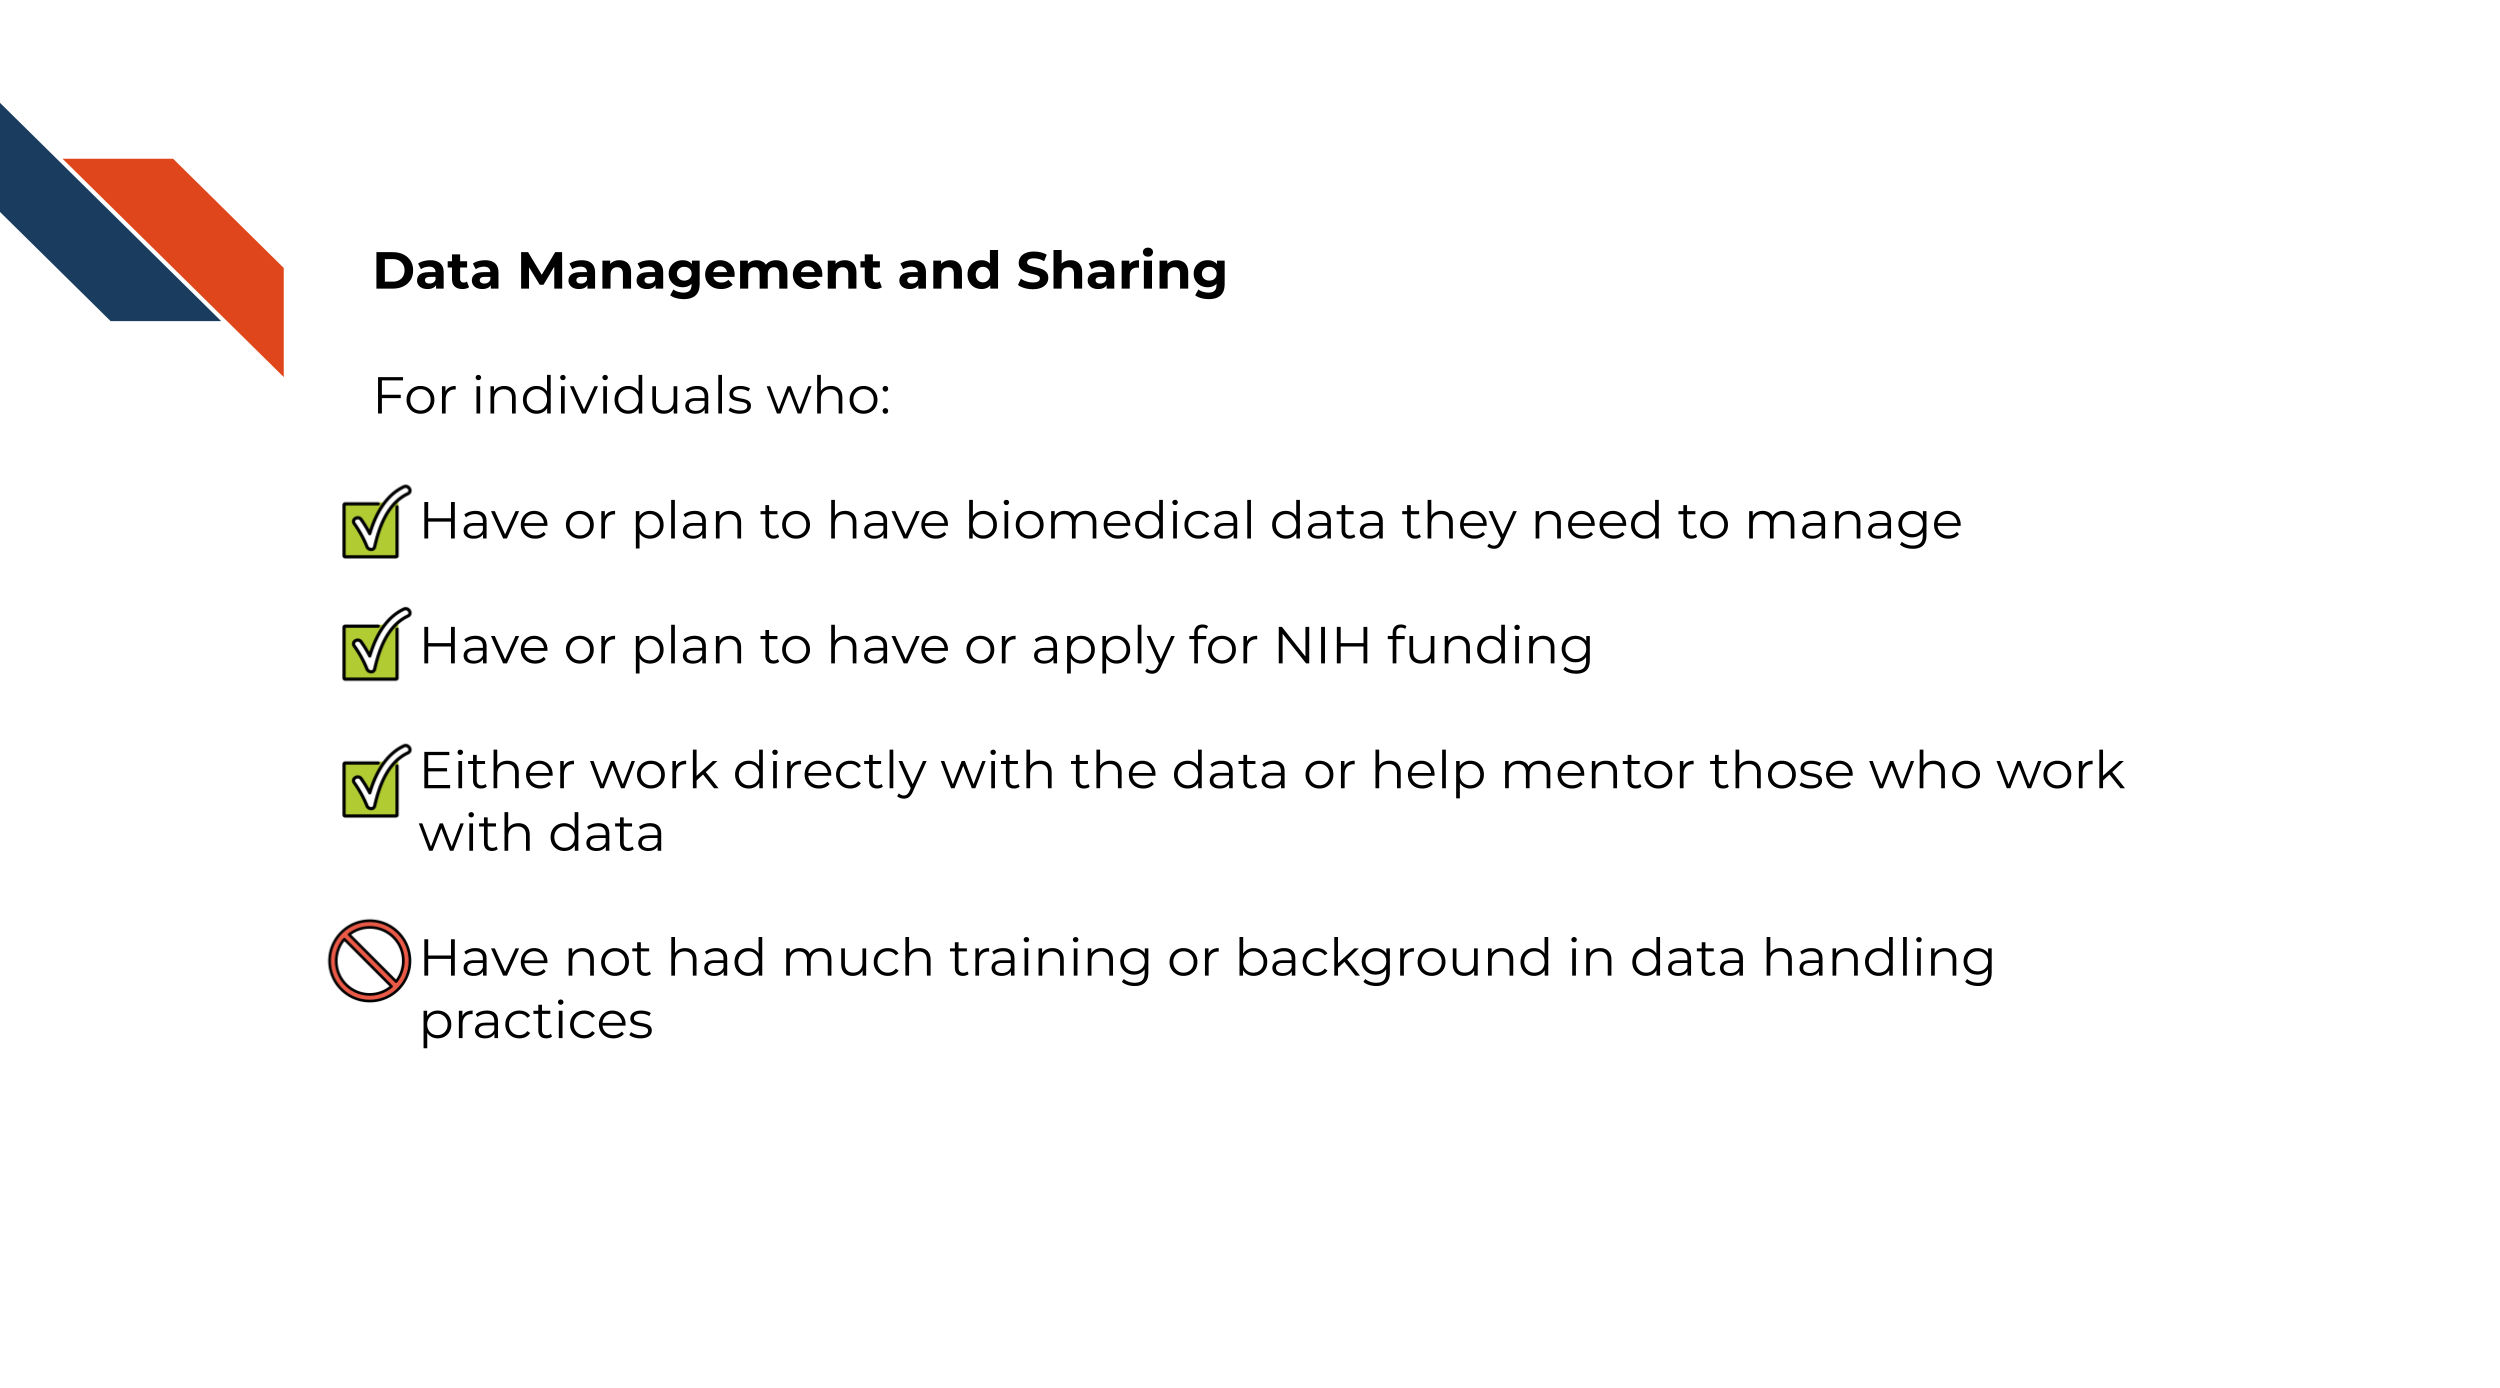 For individuals who:Have or plan to have biomedical data they need to manage, Have or plan to have or apply for NIH funding, Either work directly with the data or help mentor those who work with data,Have not had much training or background in data handling practices